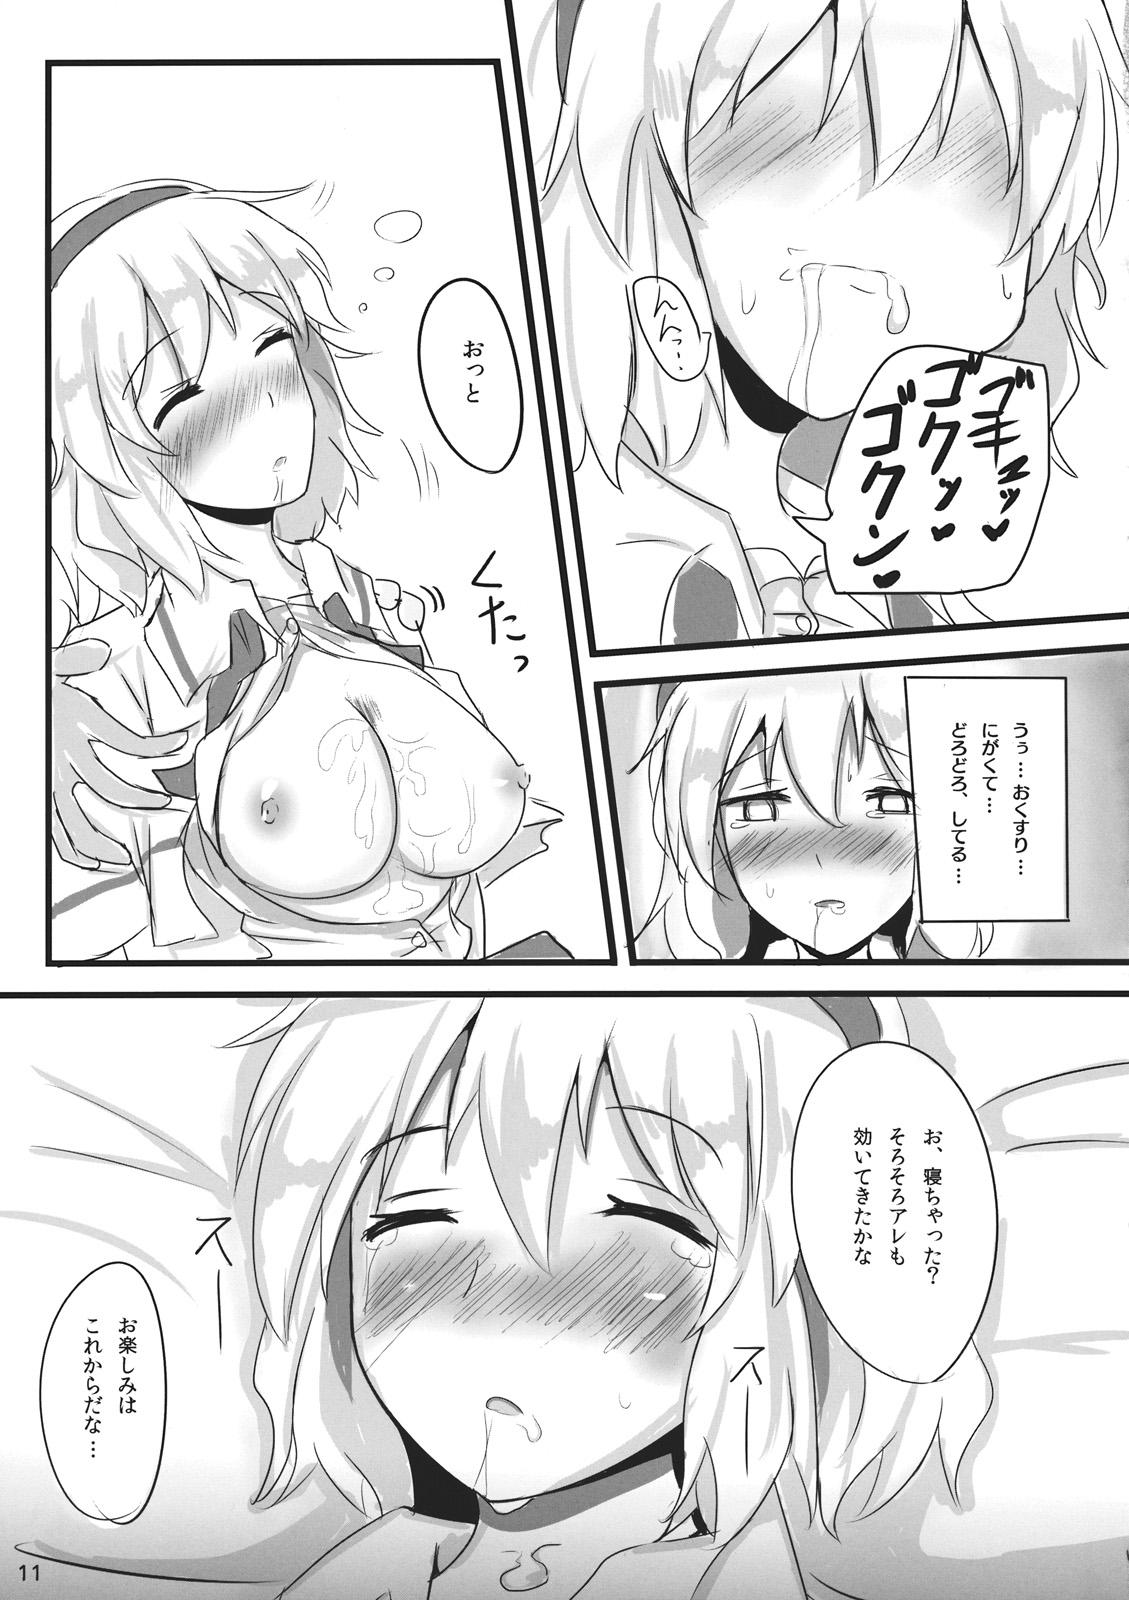 Audition Nanairo Syndrome - Touhou project Gays - Page 11